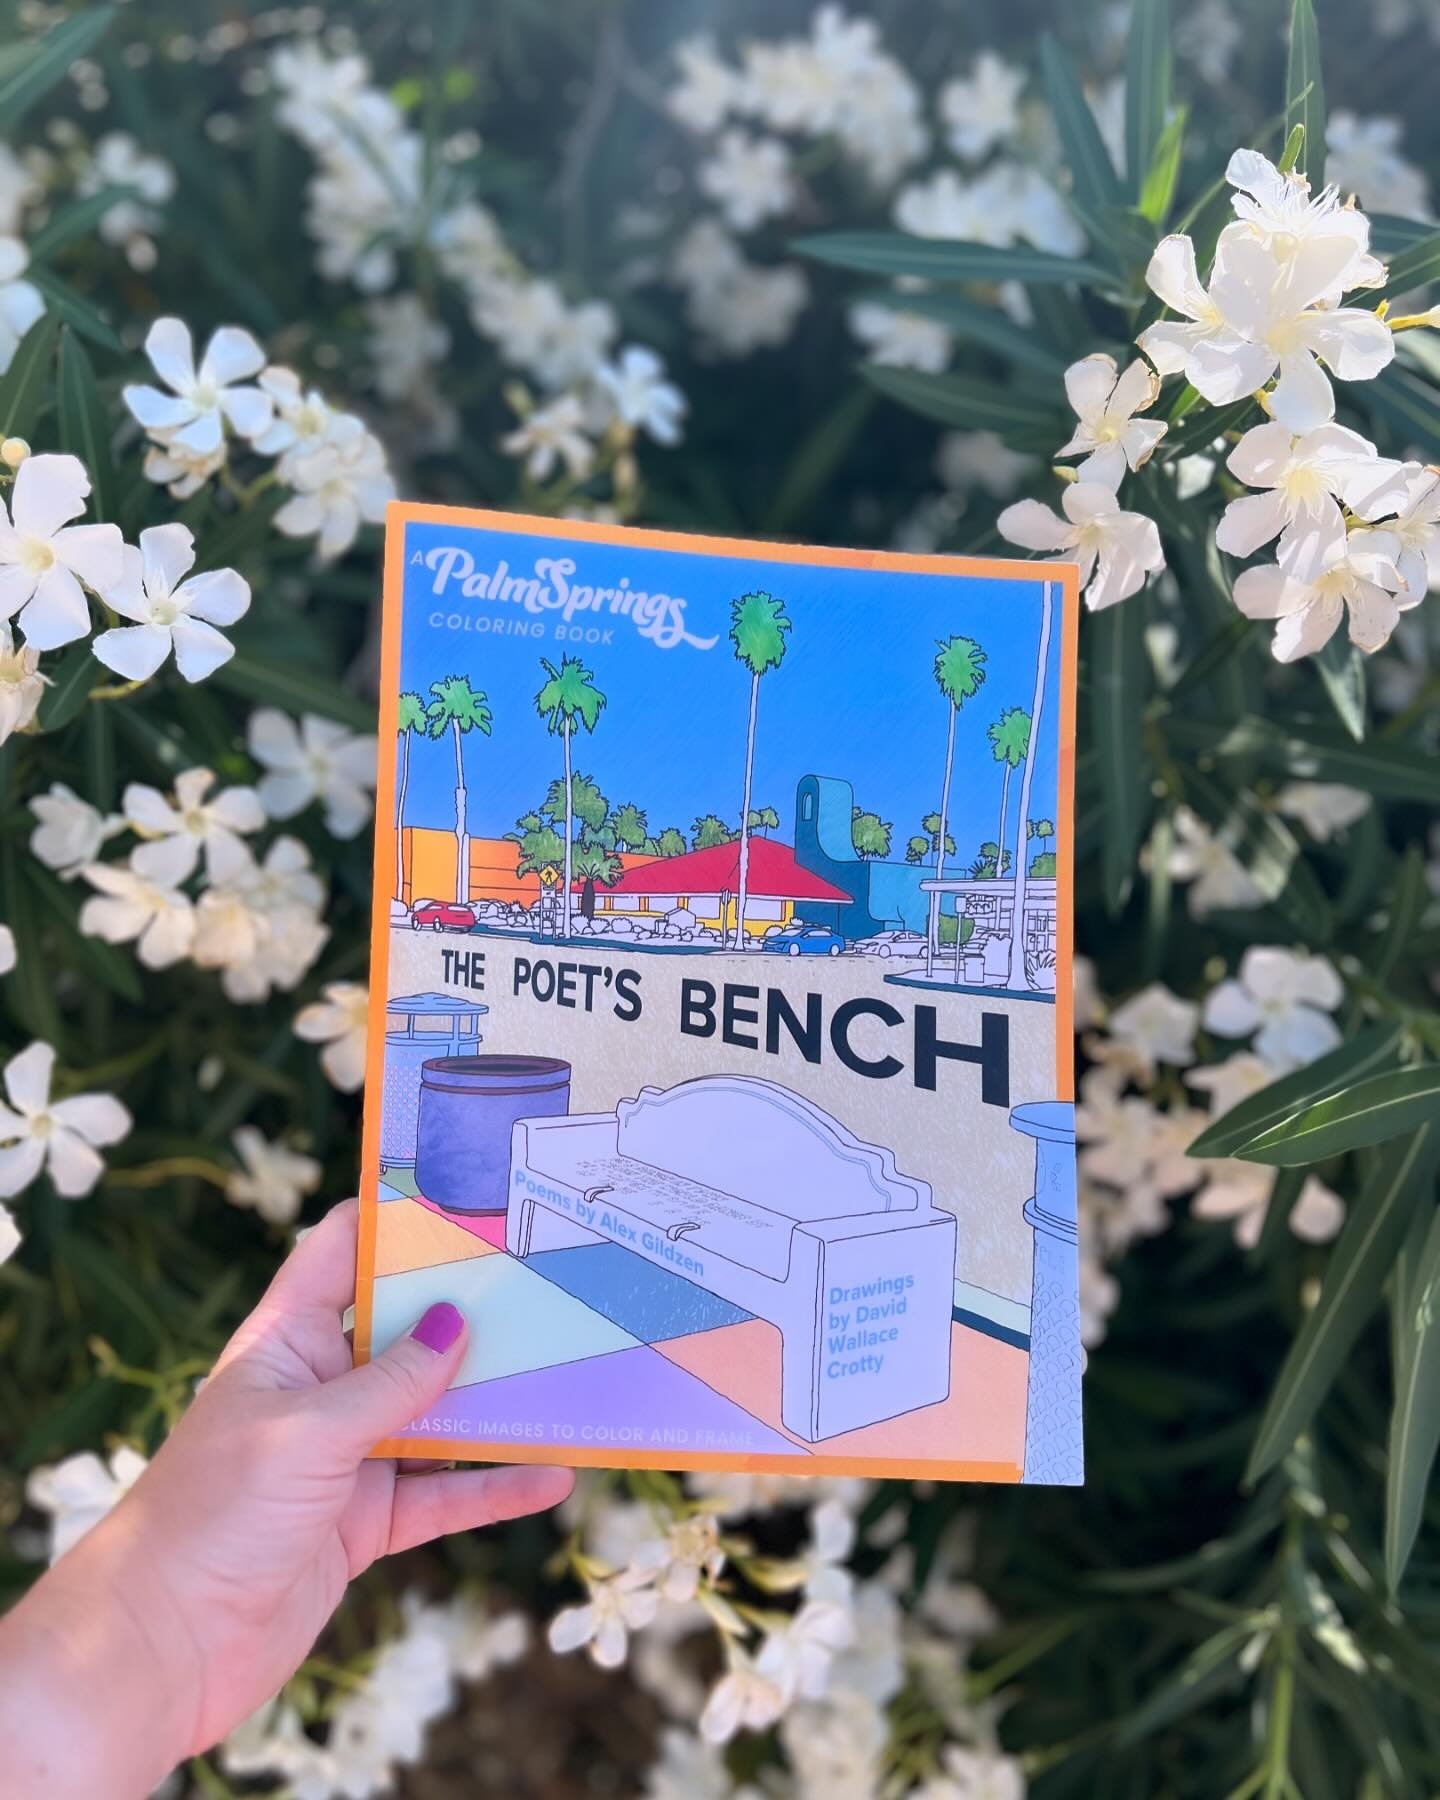 Happy to share that &ldquo;The Bench&rdquo; coloring book inspired by my @pspublicart project is now on sale at @shop.phylum in Palm Springs. 

The book was inspired by poems by @gildzen and illustrated by @david_crotty 

#coloring #coloringbook #col